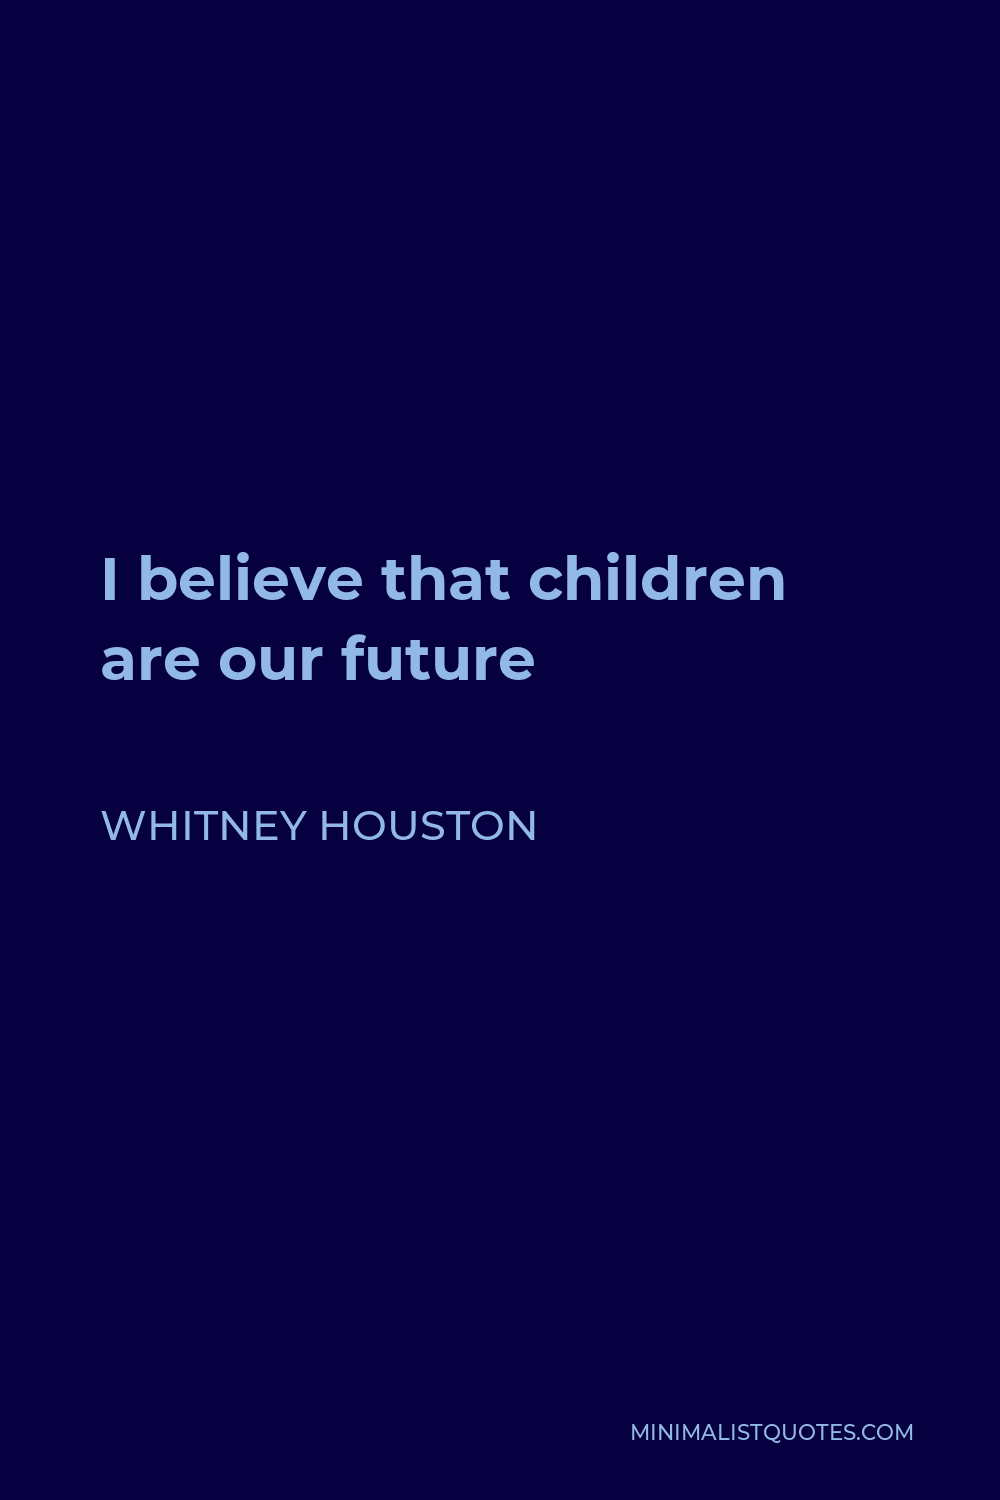 Whitney Houston Quote - I believe that children are our future